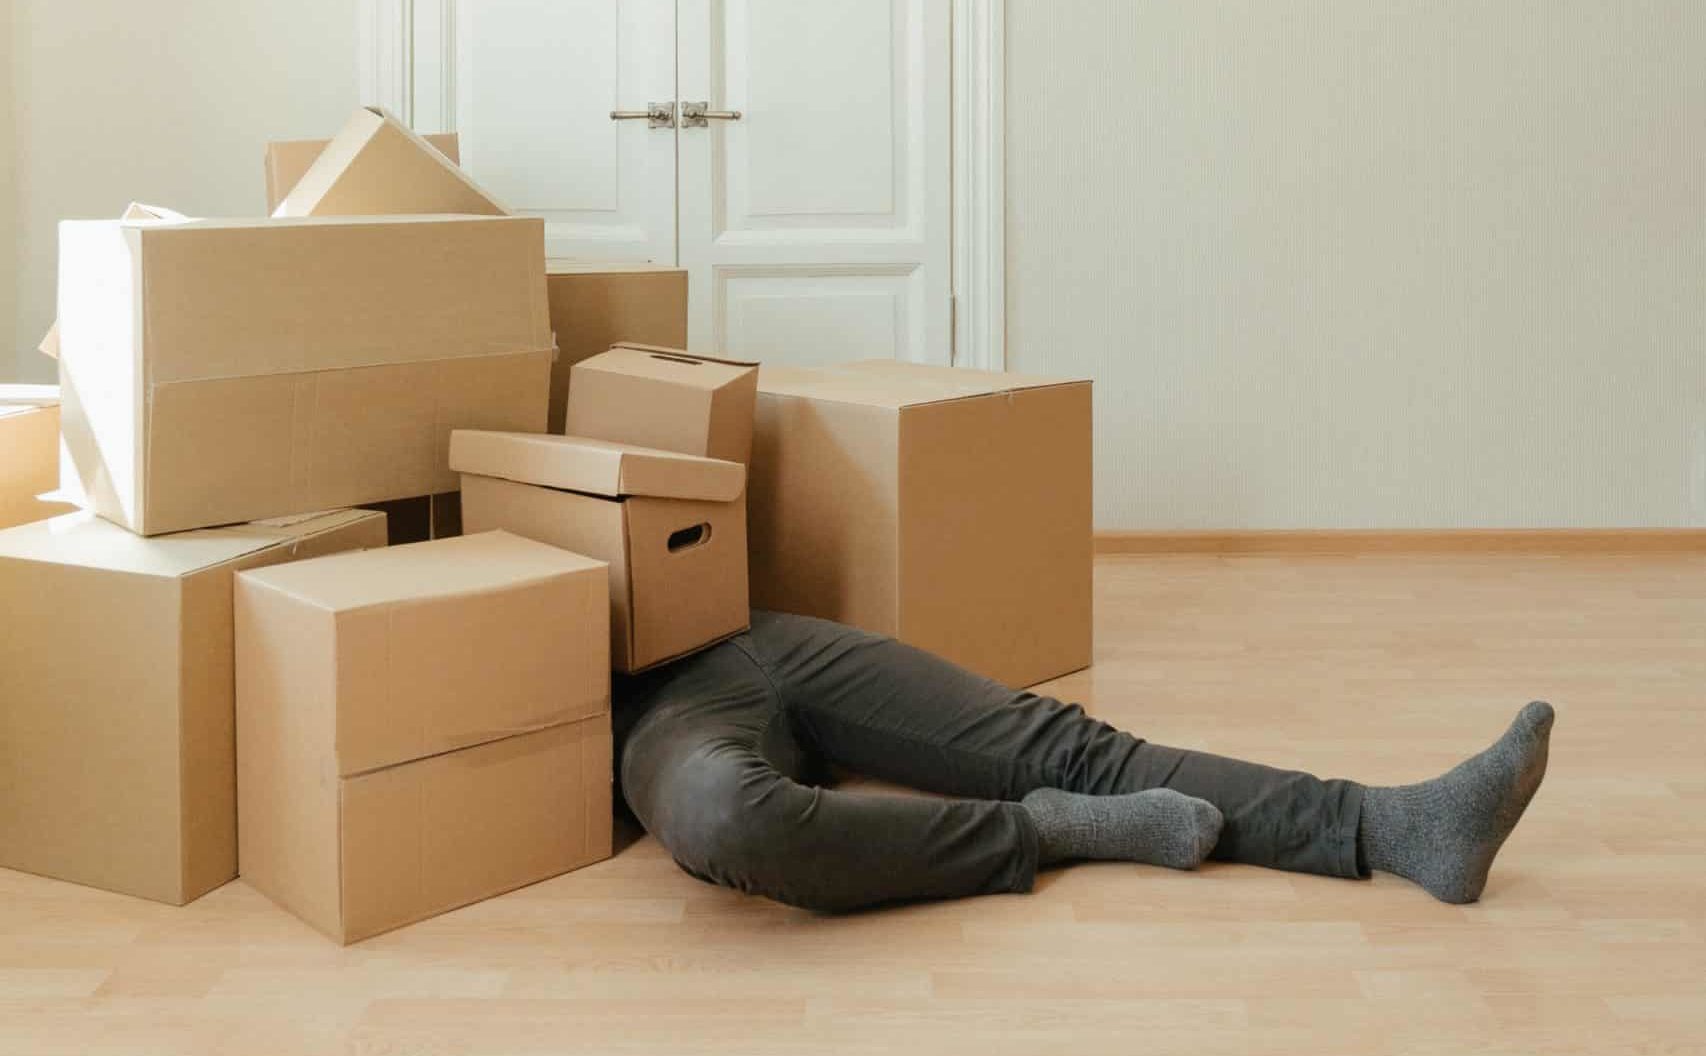 A man lays under a pile of cardboard moving boxes.